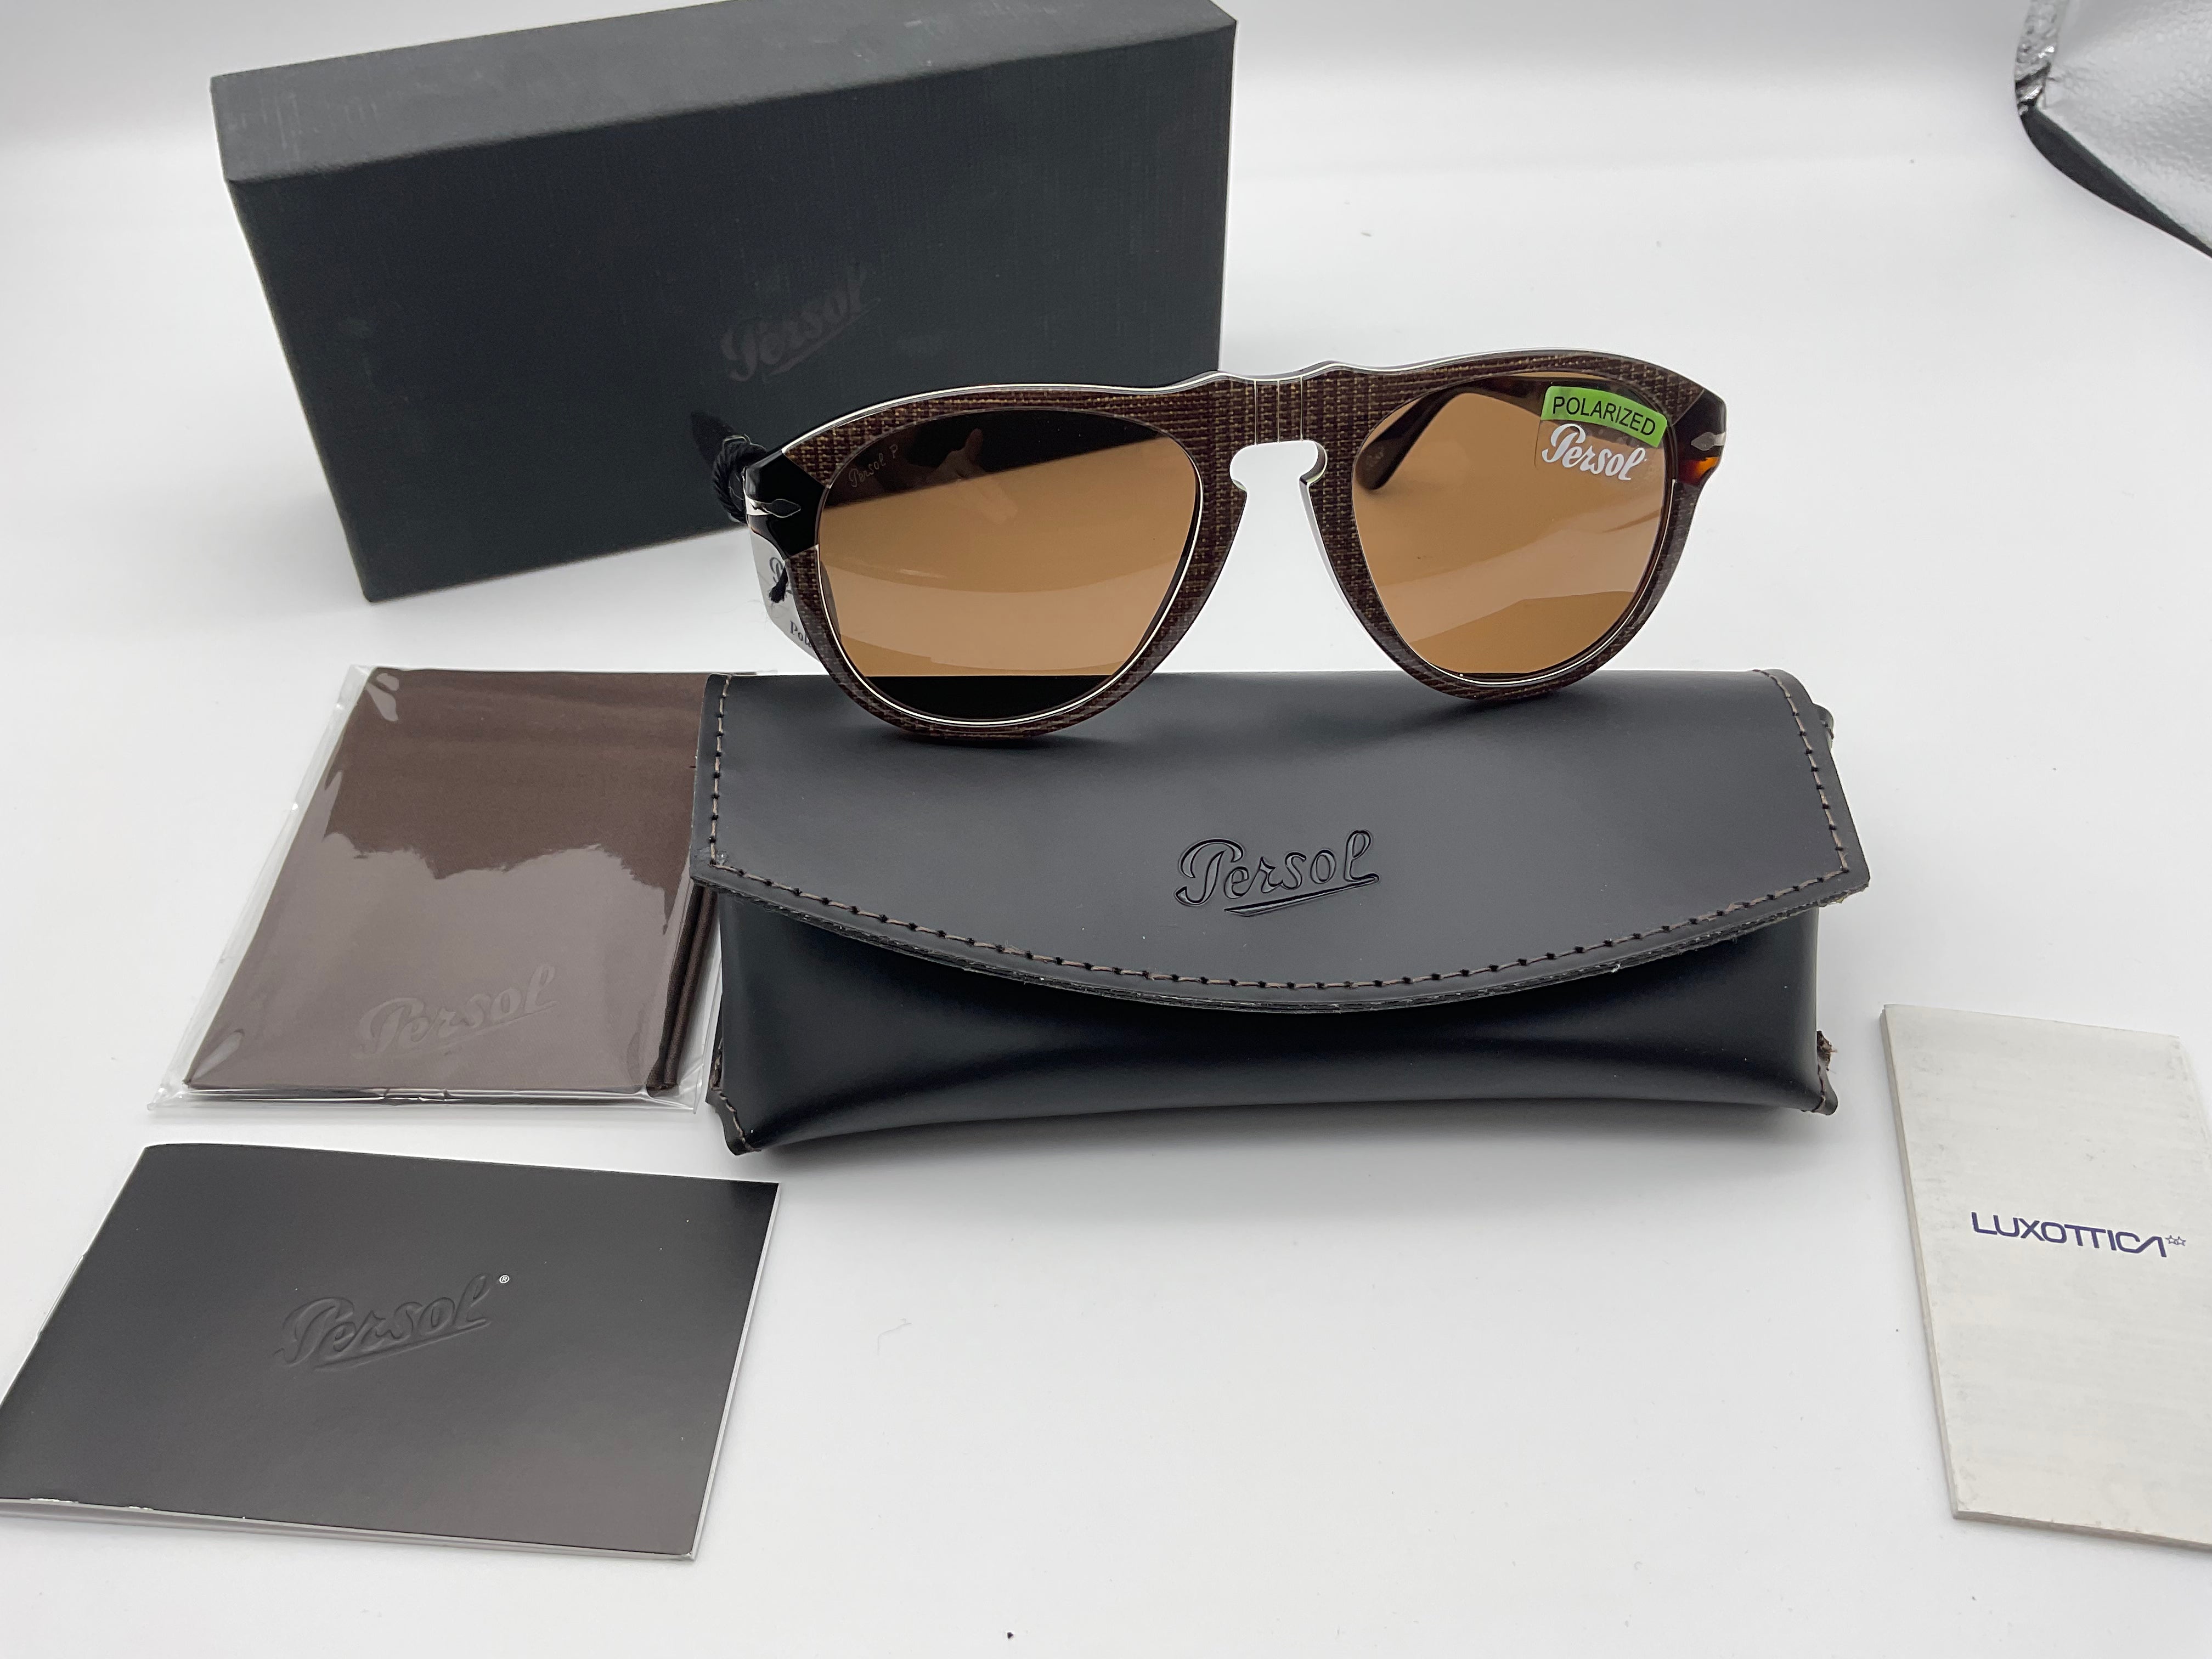 PERSOL SUNGLASSES 649 1091AN BROWN POLARIZED 52mm – Shade Review Store